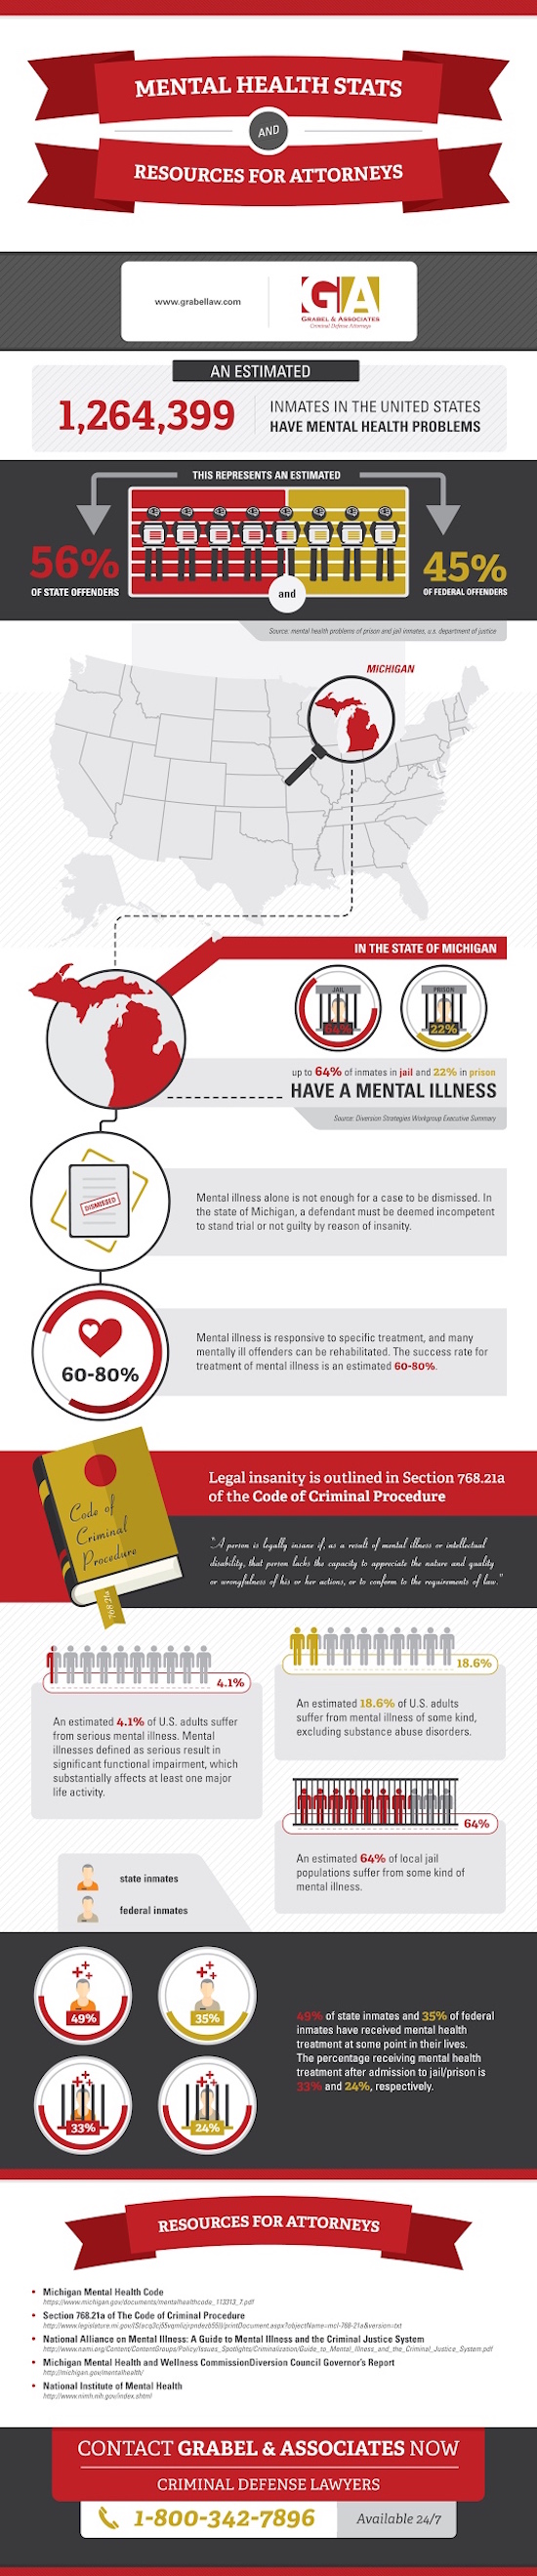 Mental Health Stats and Resources for Attorneys infographic